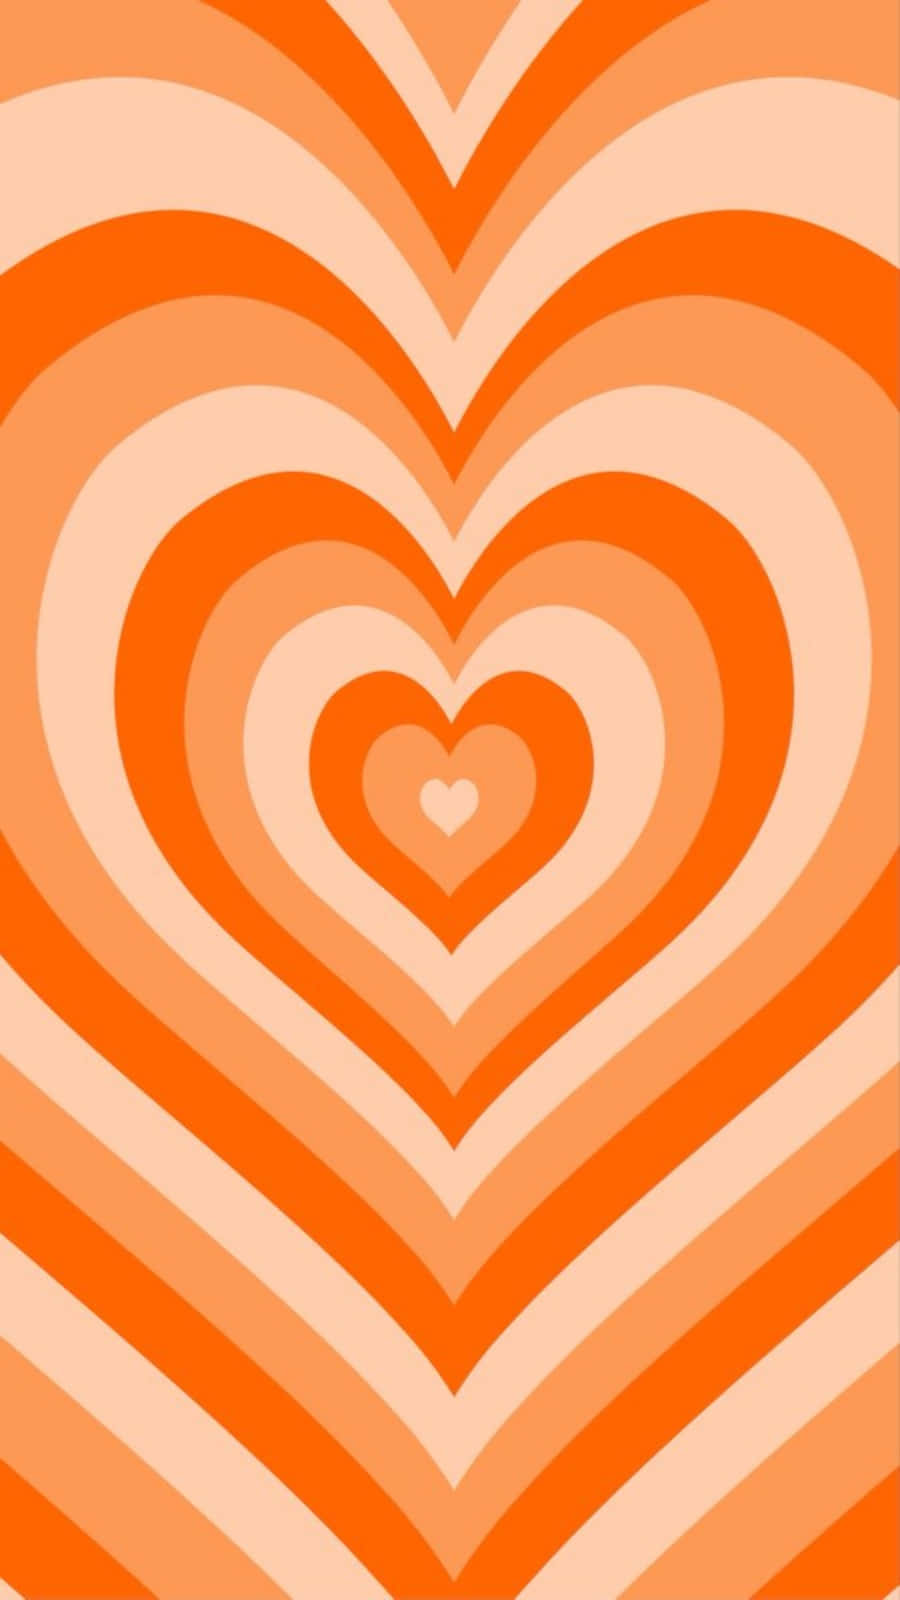 Orange Heart with Radiant Glowing Background Wallpaper